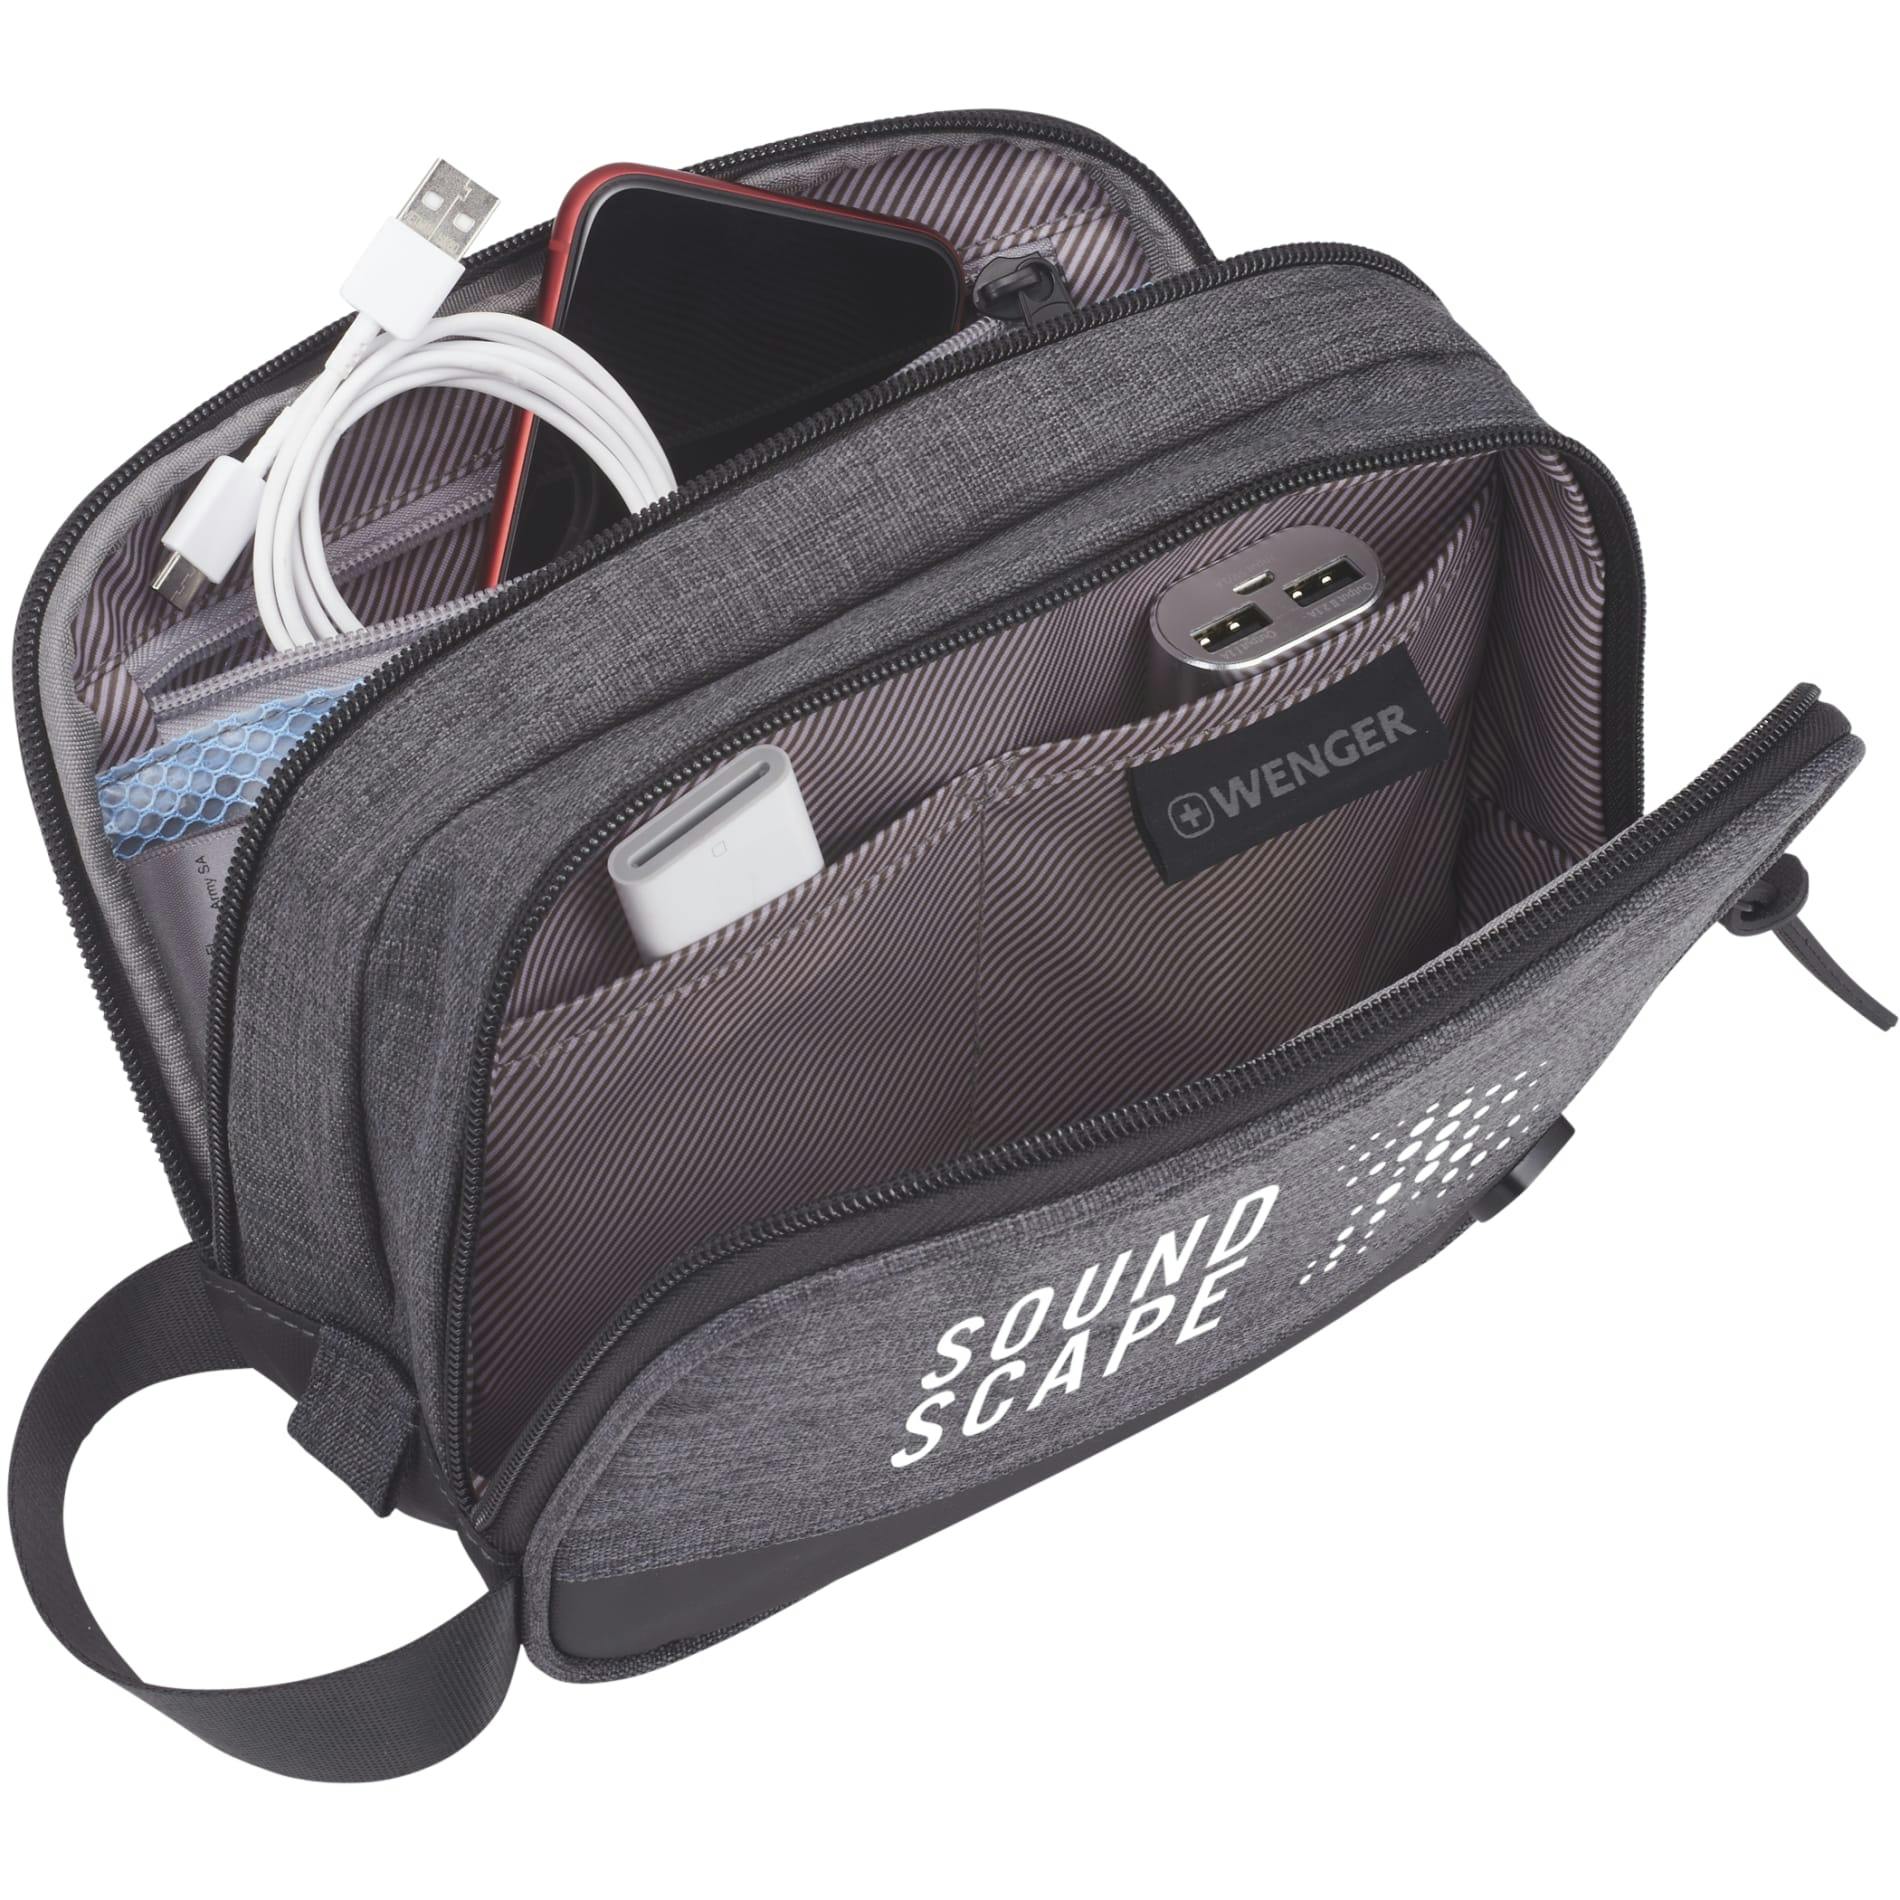 Wenger RPET Dual Compartment Dopp Kit - additional Image 9